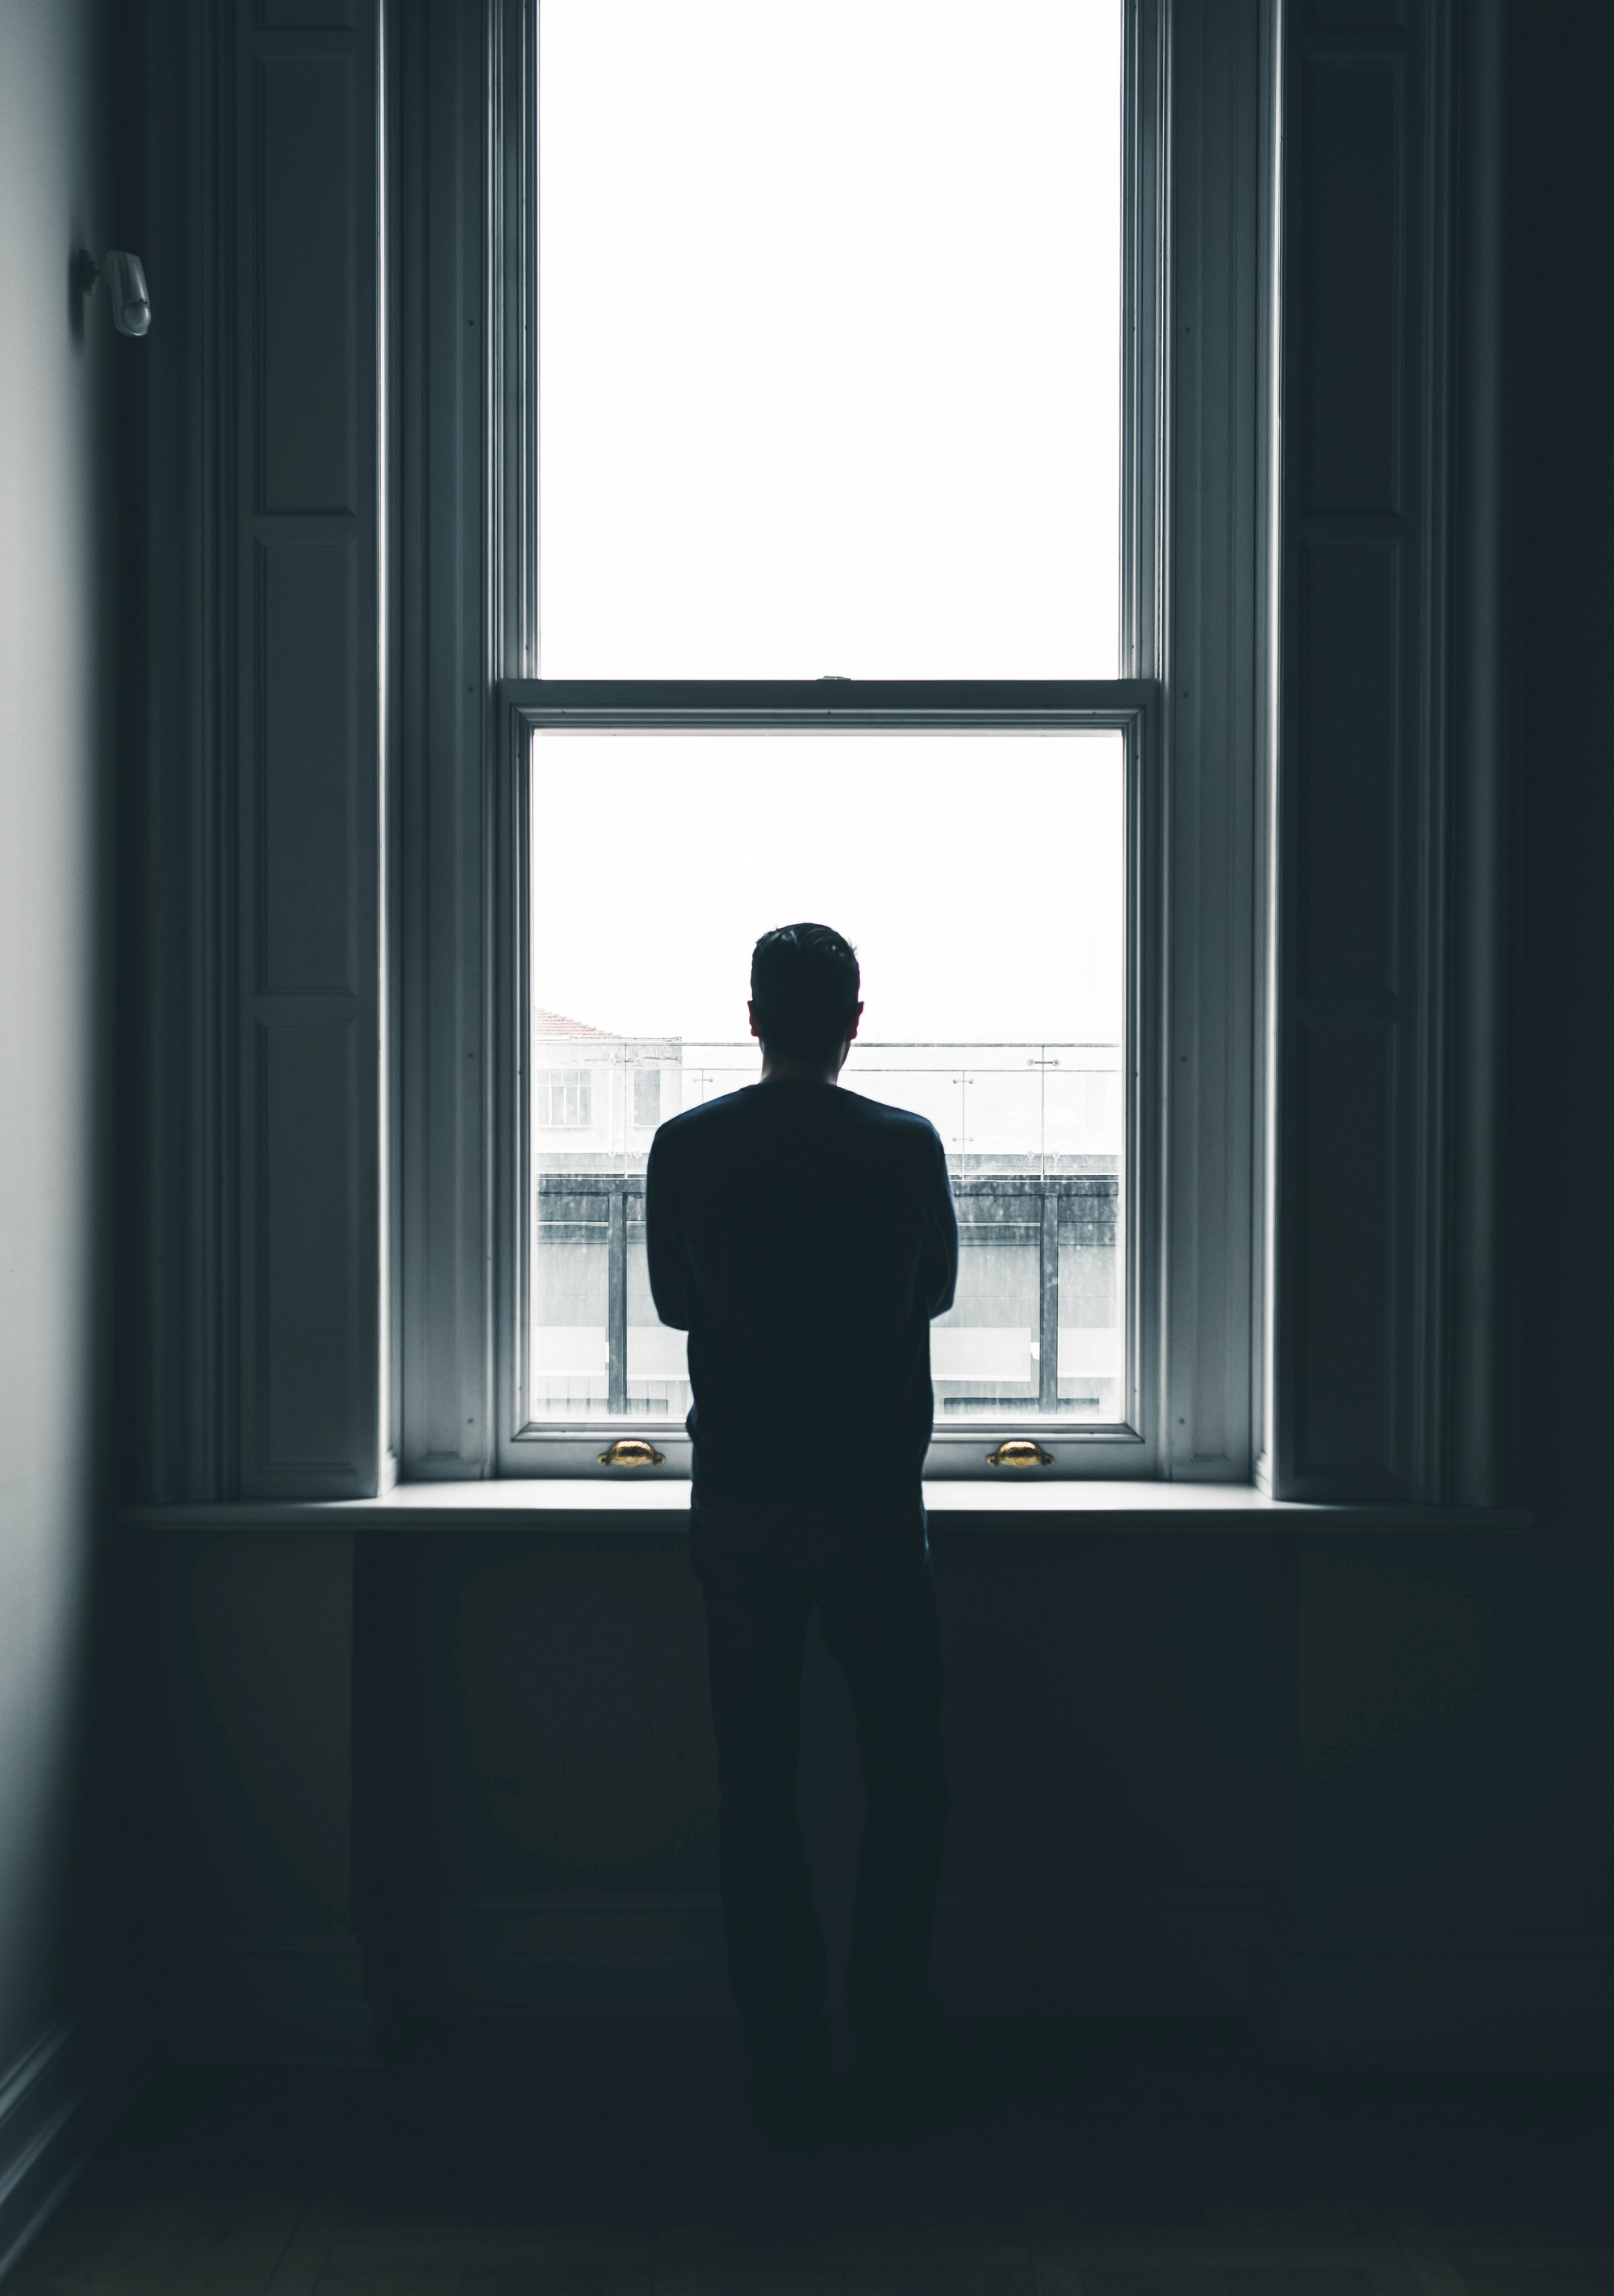 Photo of a person silhouetted in a dark room looking out the window